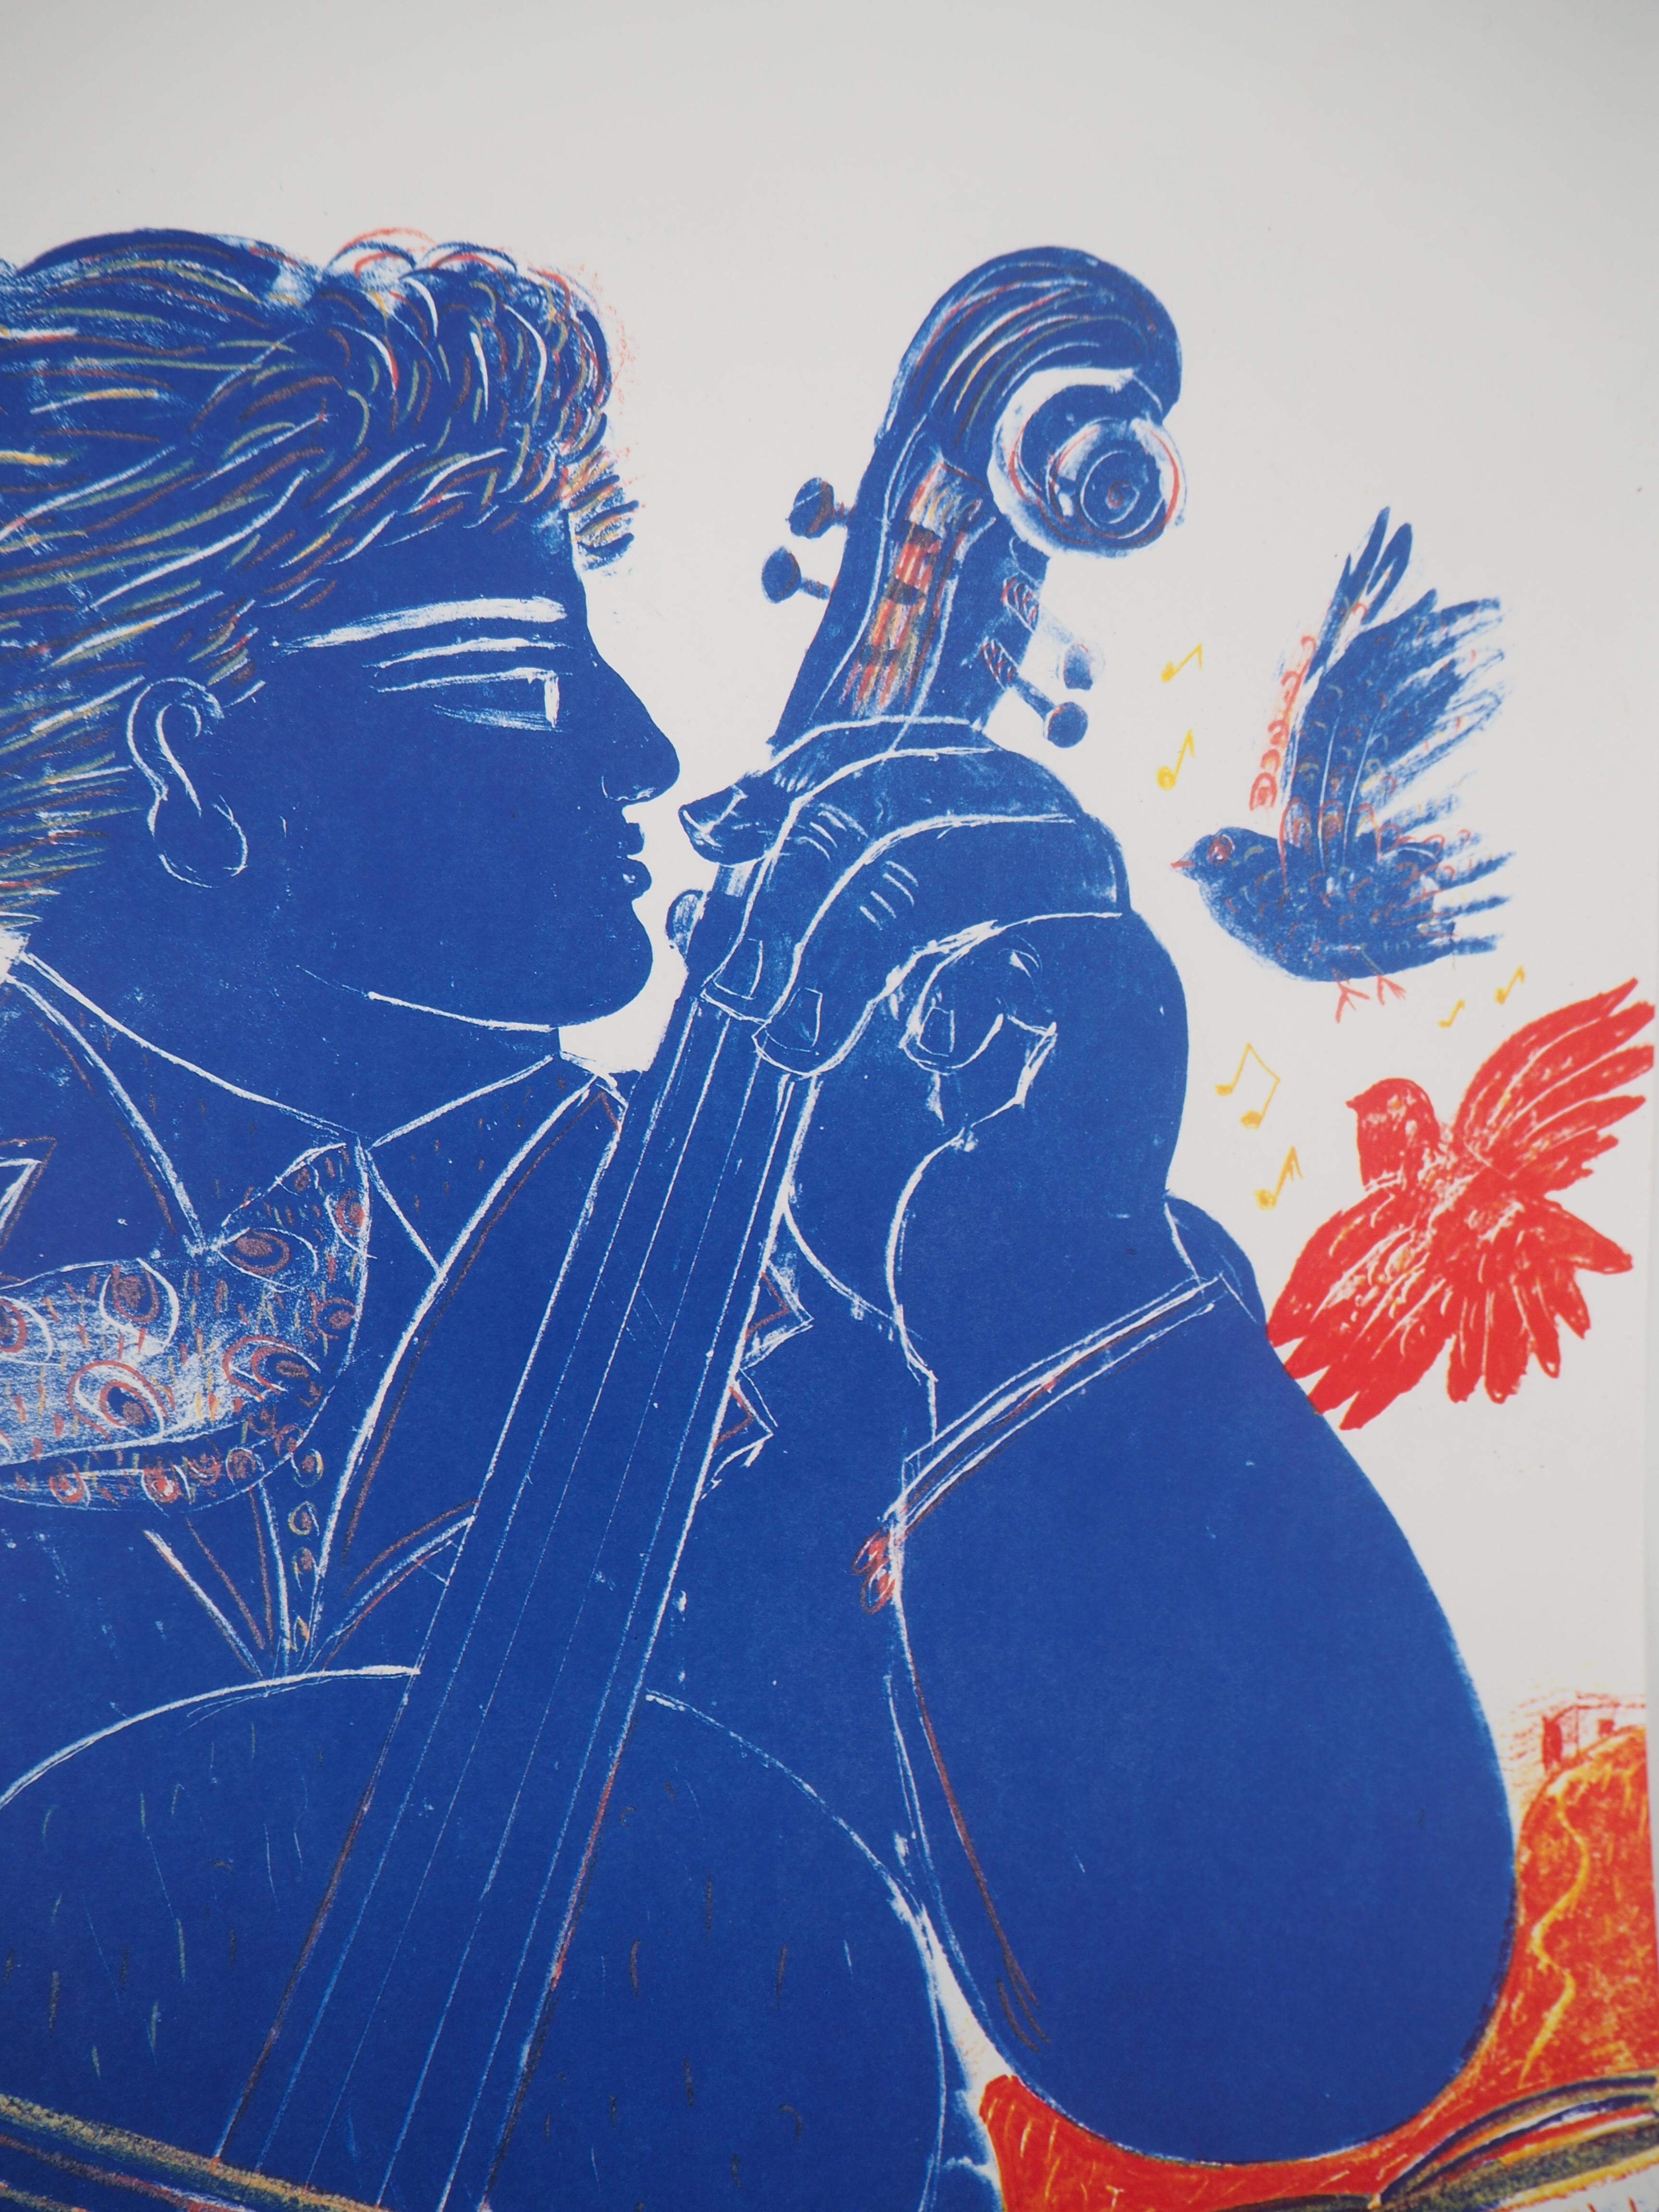 Greece : Music, Man with Cello, Singer and Birds - Original lithograph - Modern Print by Alekos Fassianos